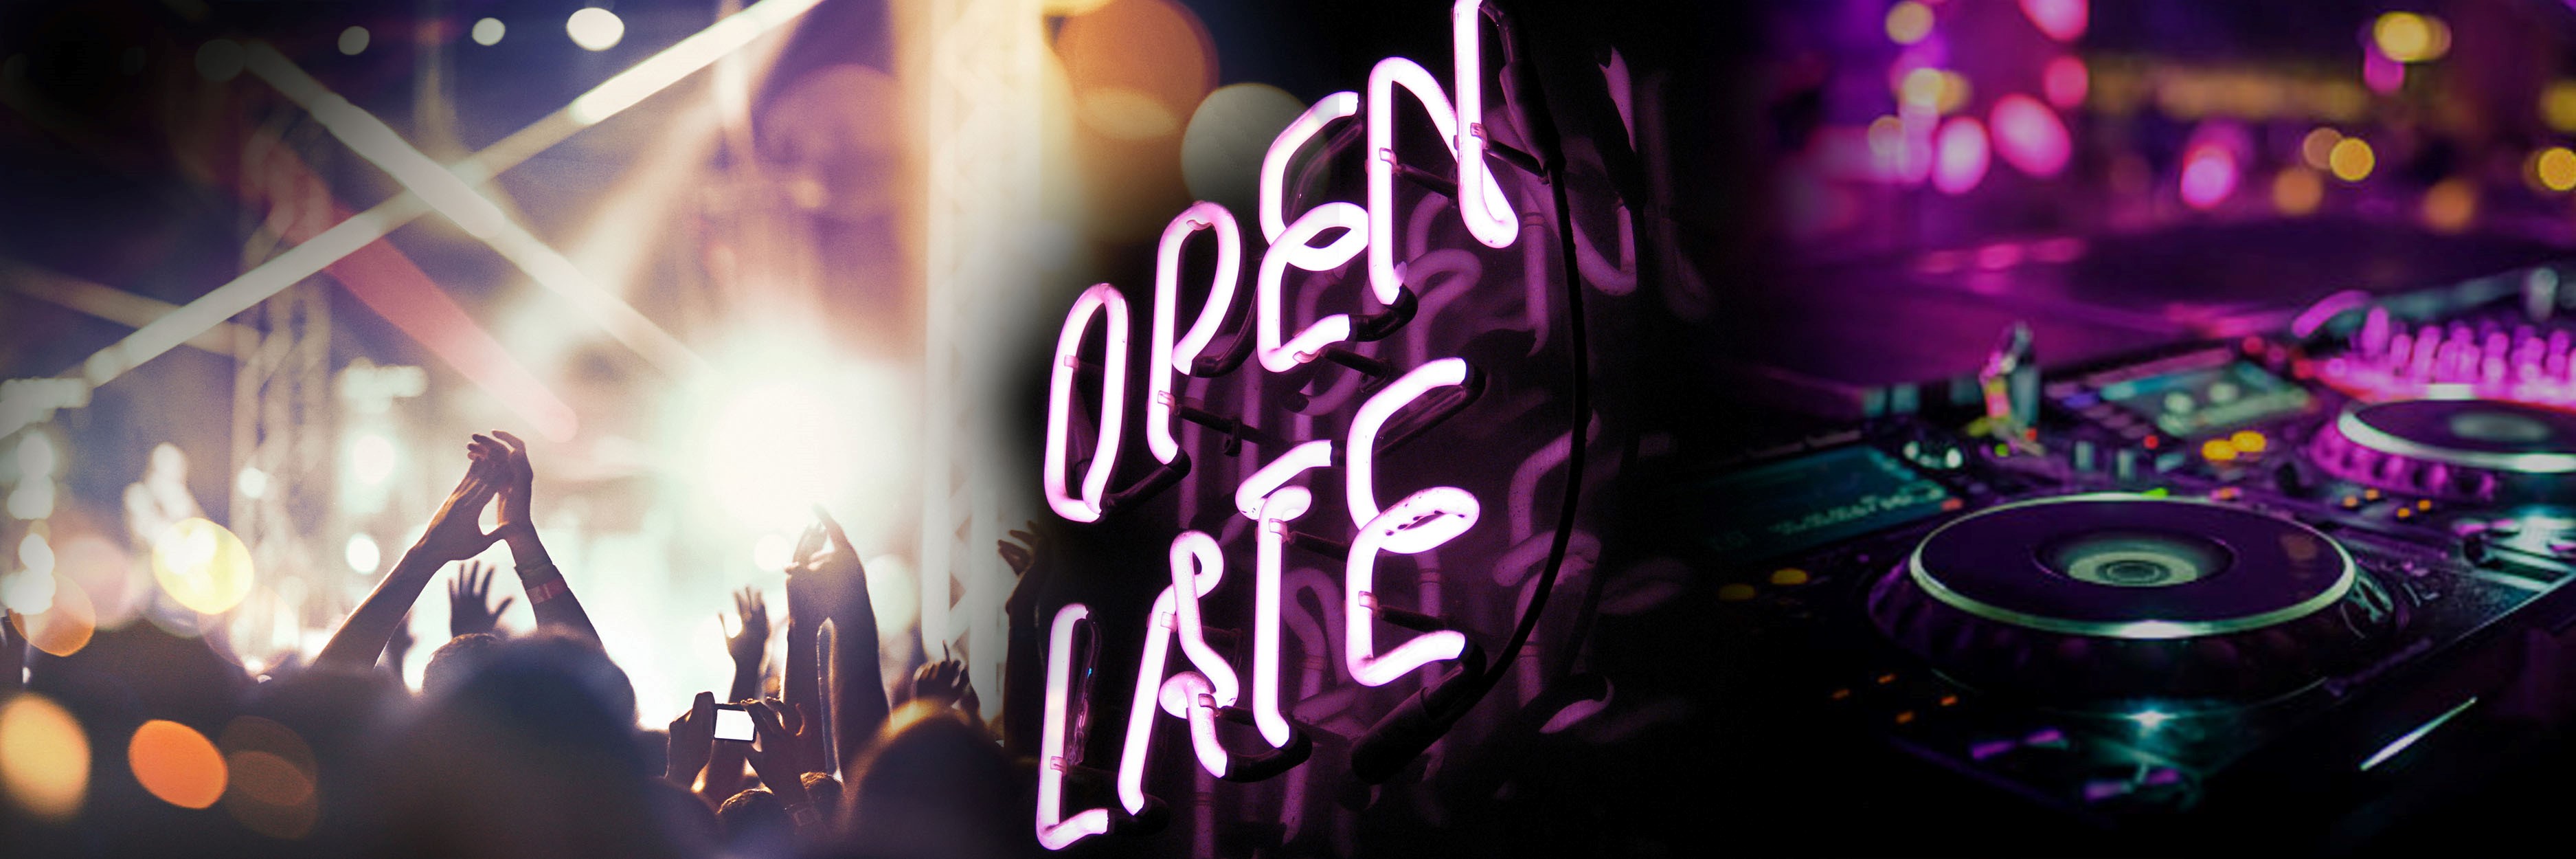 Image of neonn sign that reads "Open Late", people at a concert and a DJ playing music to a crowd